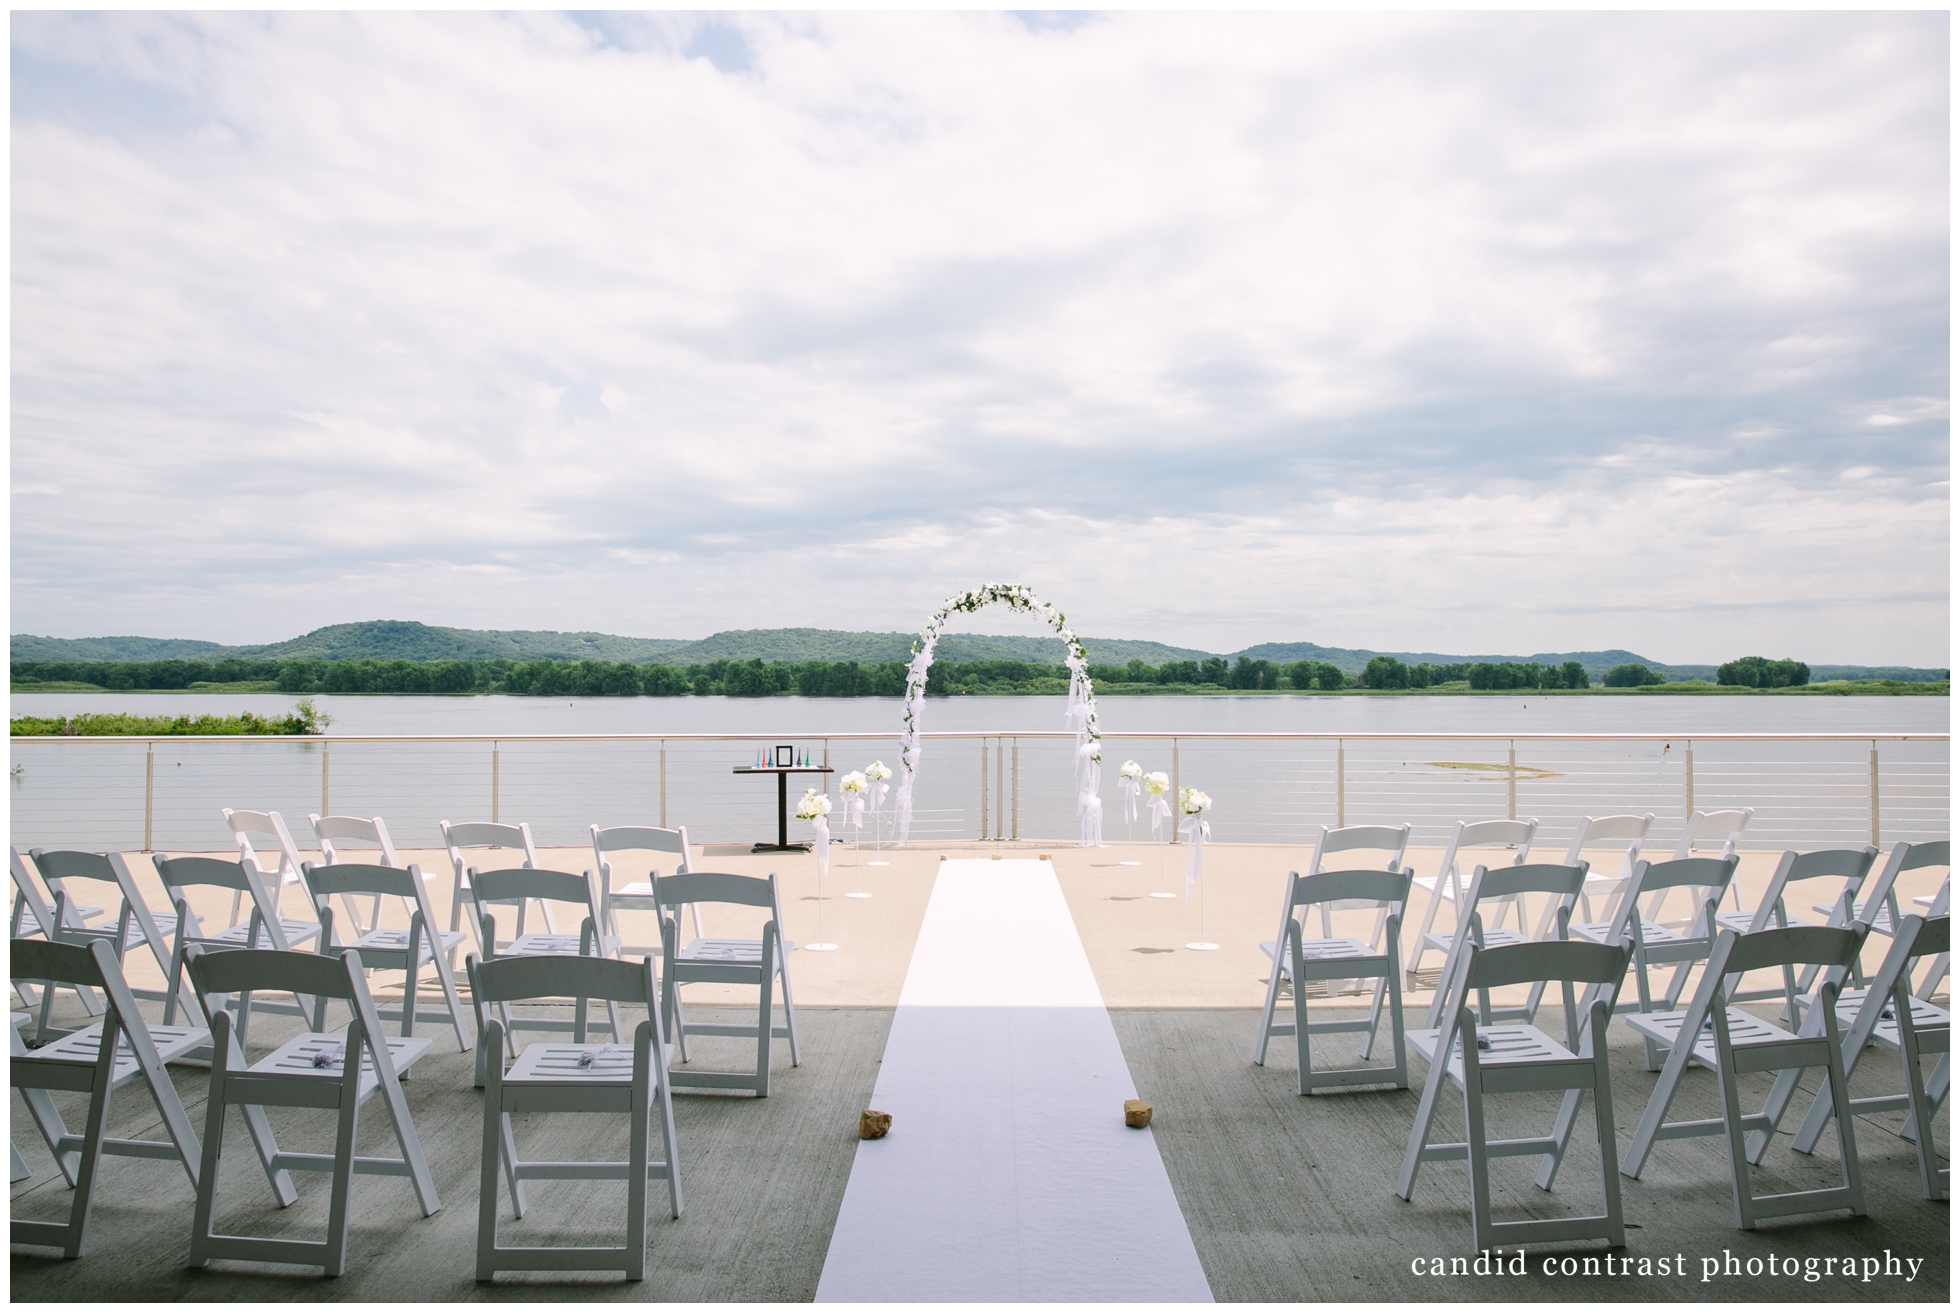 before a bellevue iowa outdoor wedding at the shore event center, iowa wedding photographer candid contrast photography